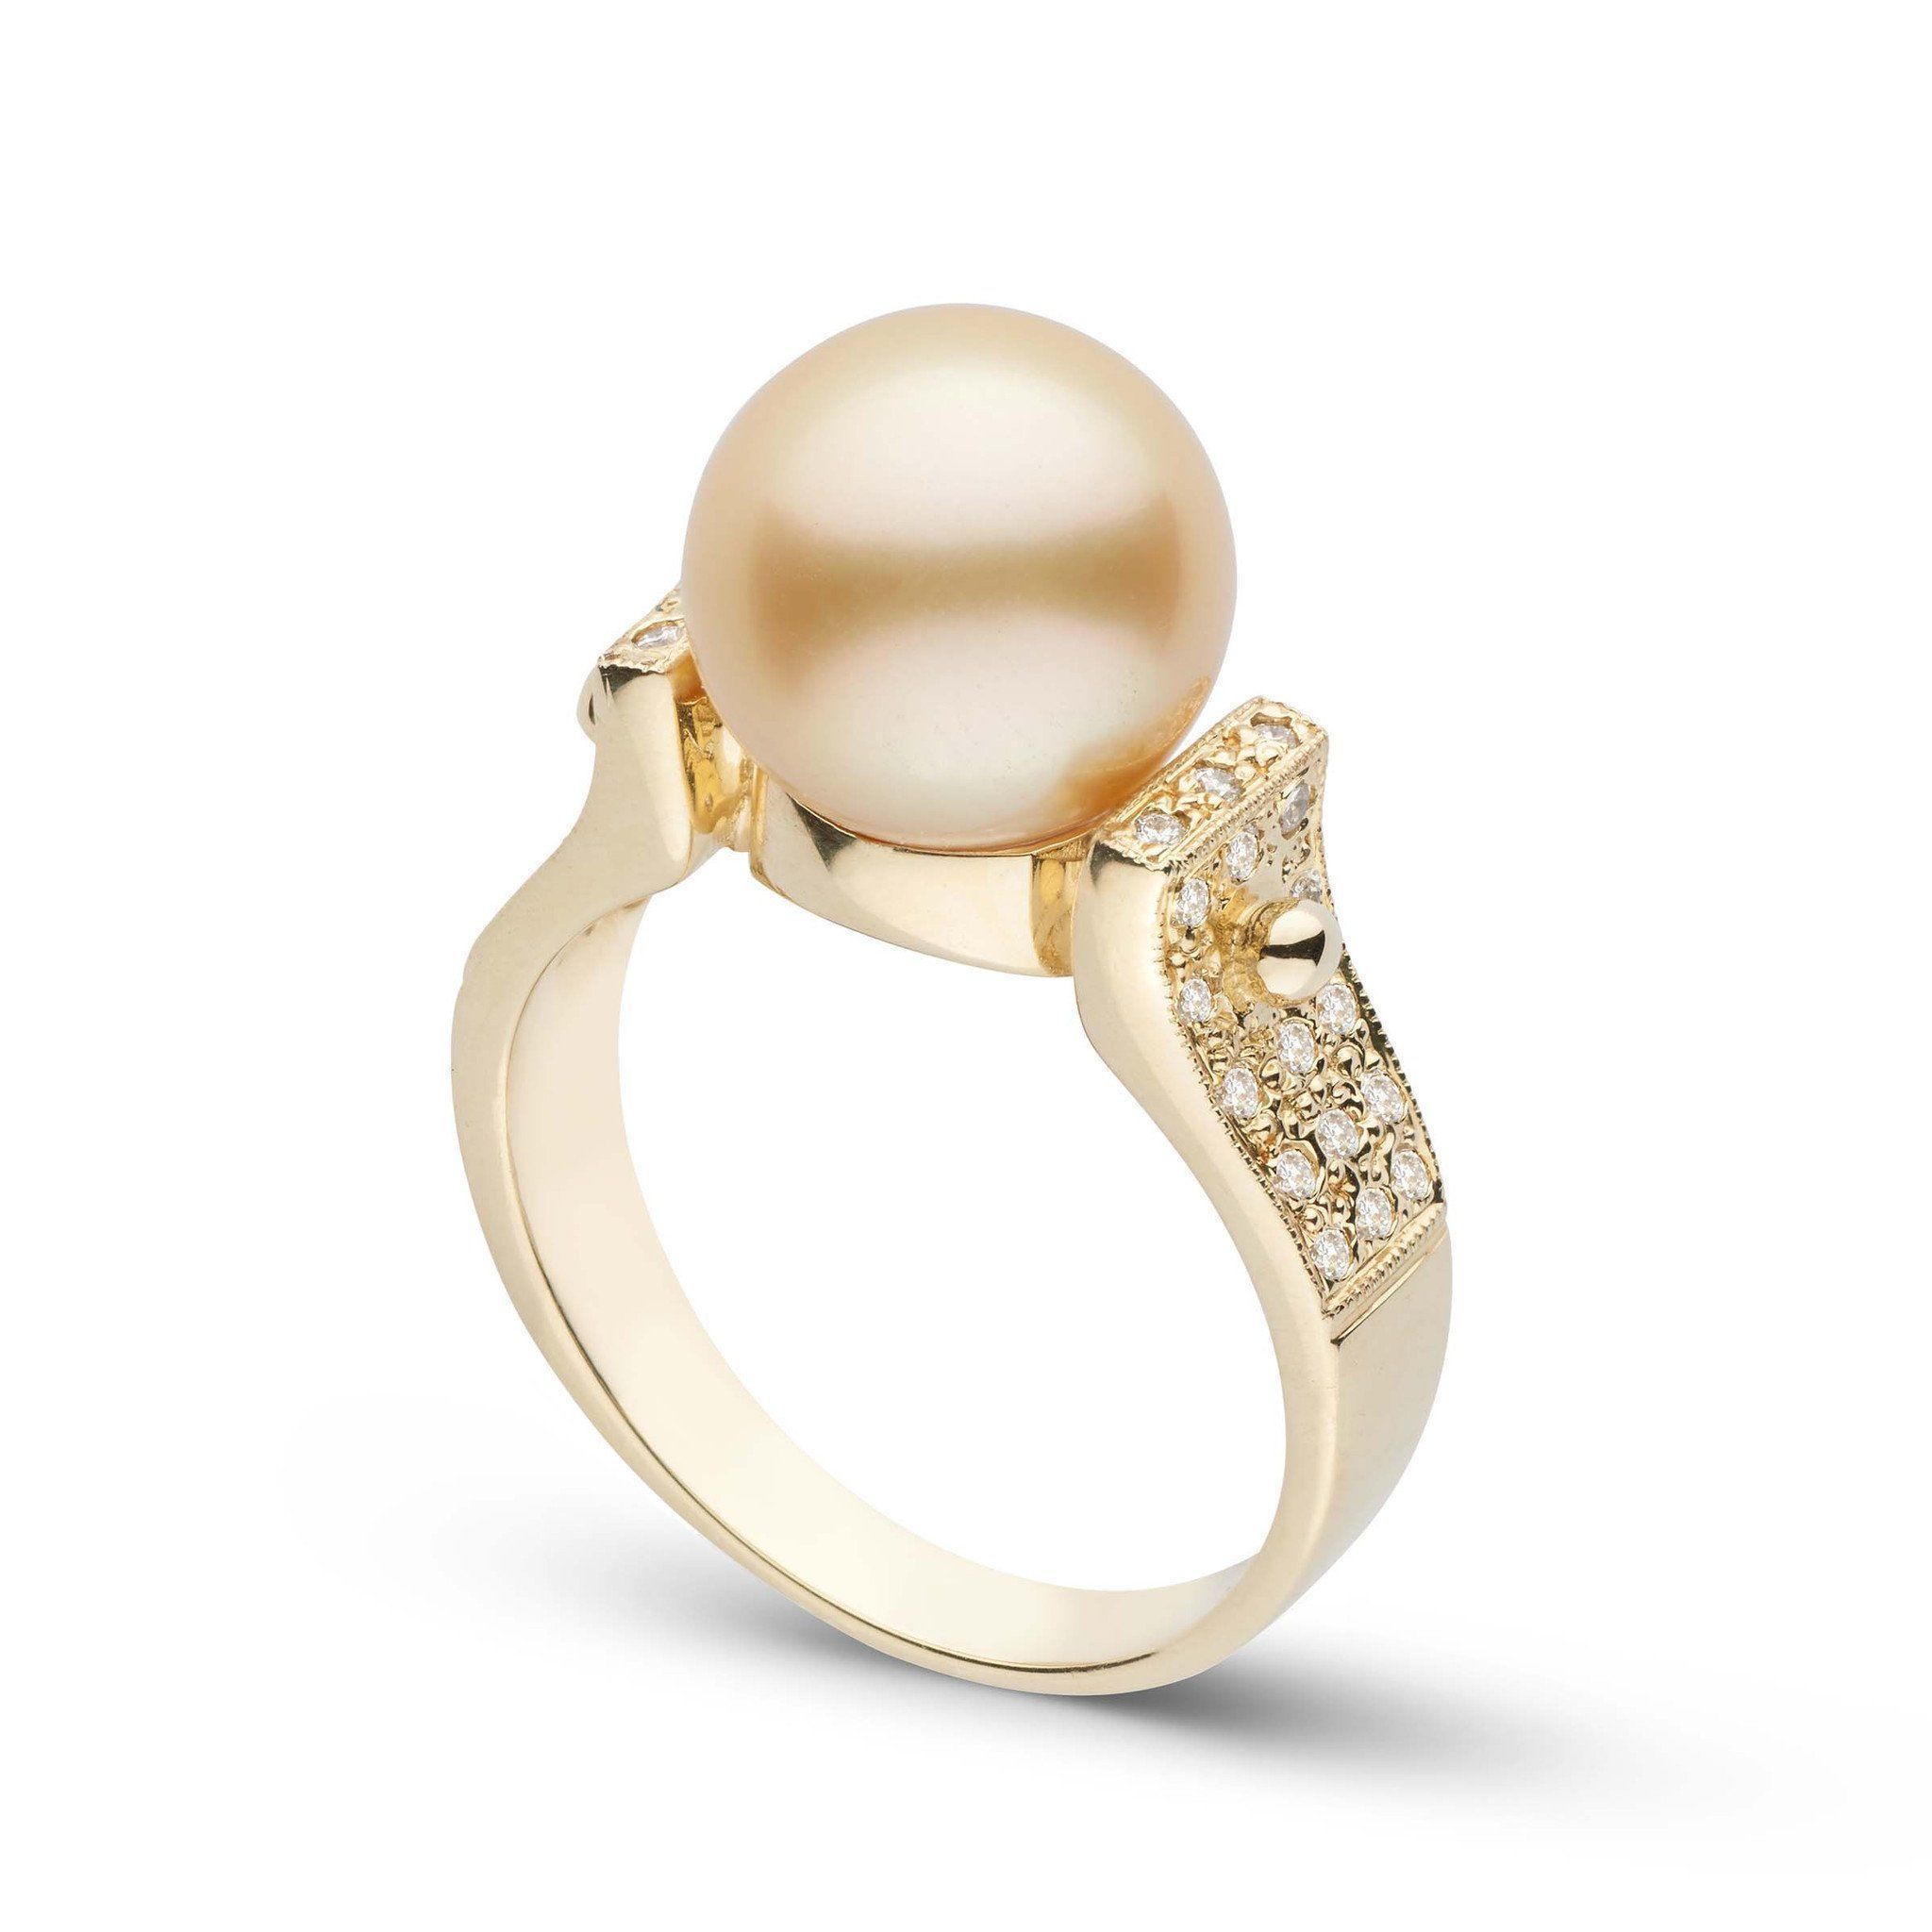 Golden South Sea Pearls